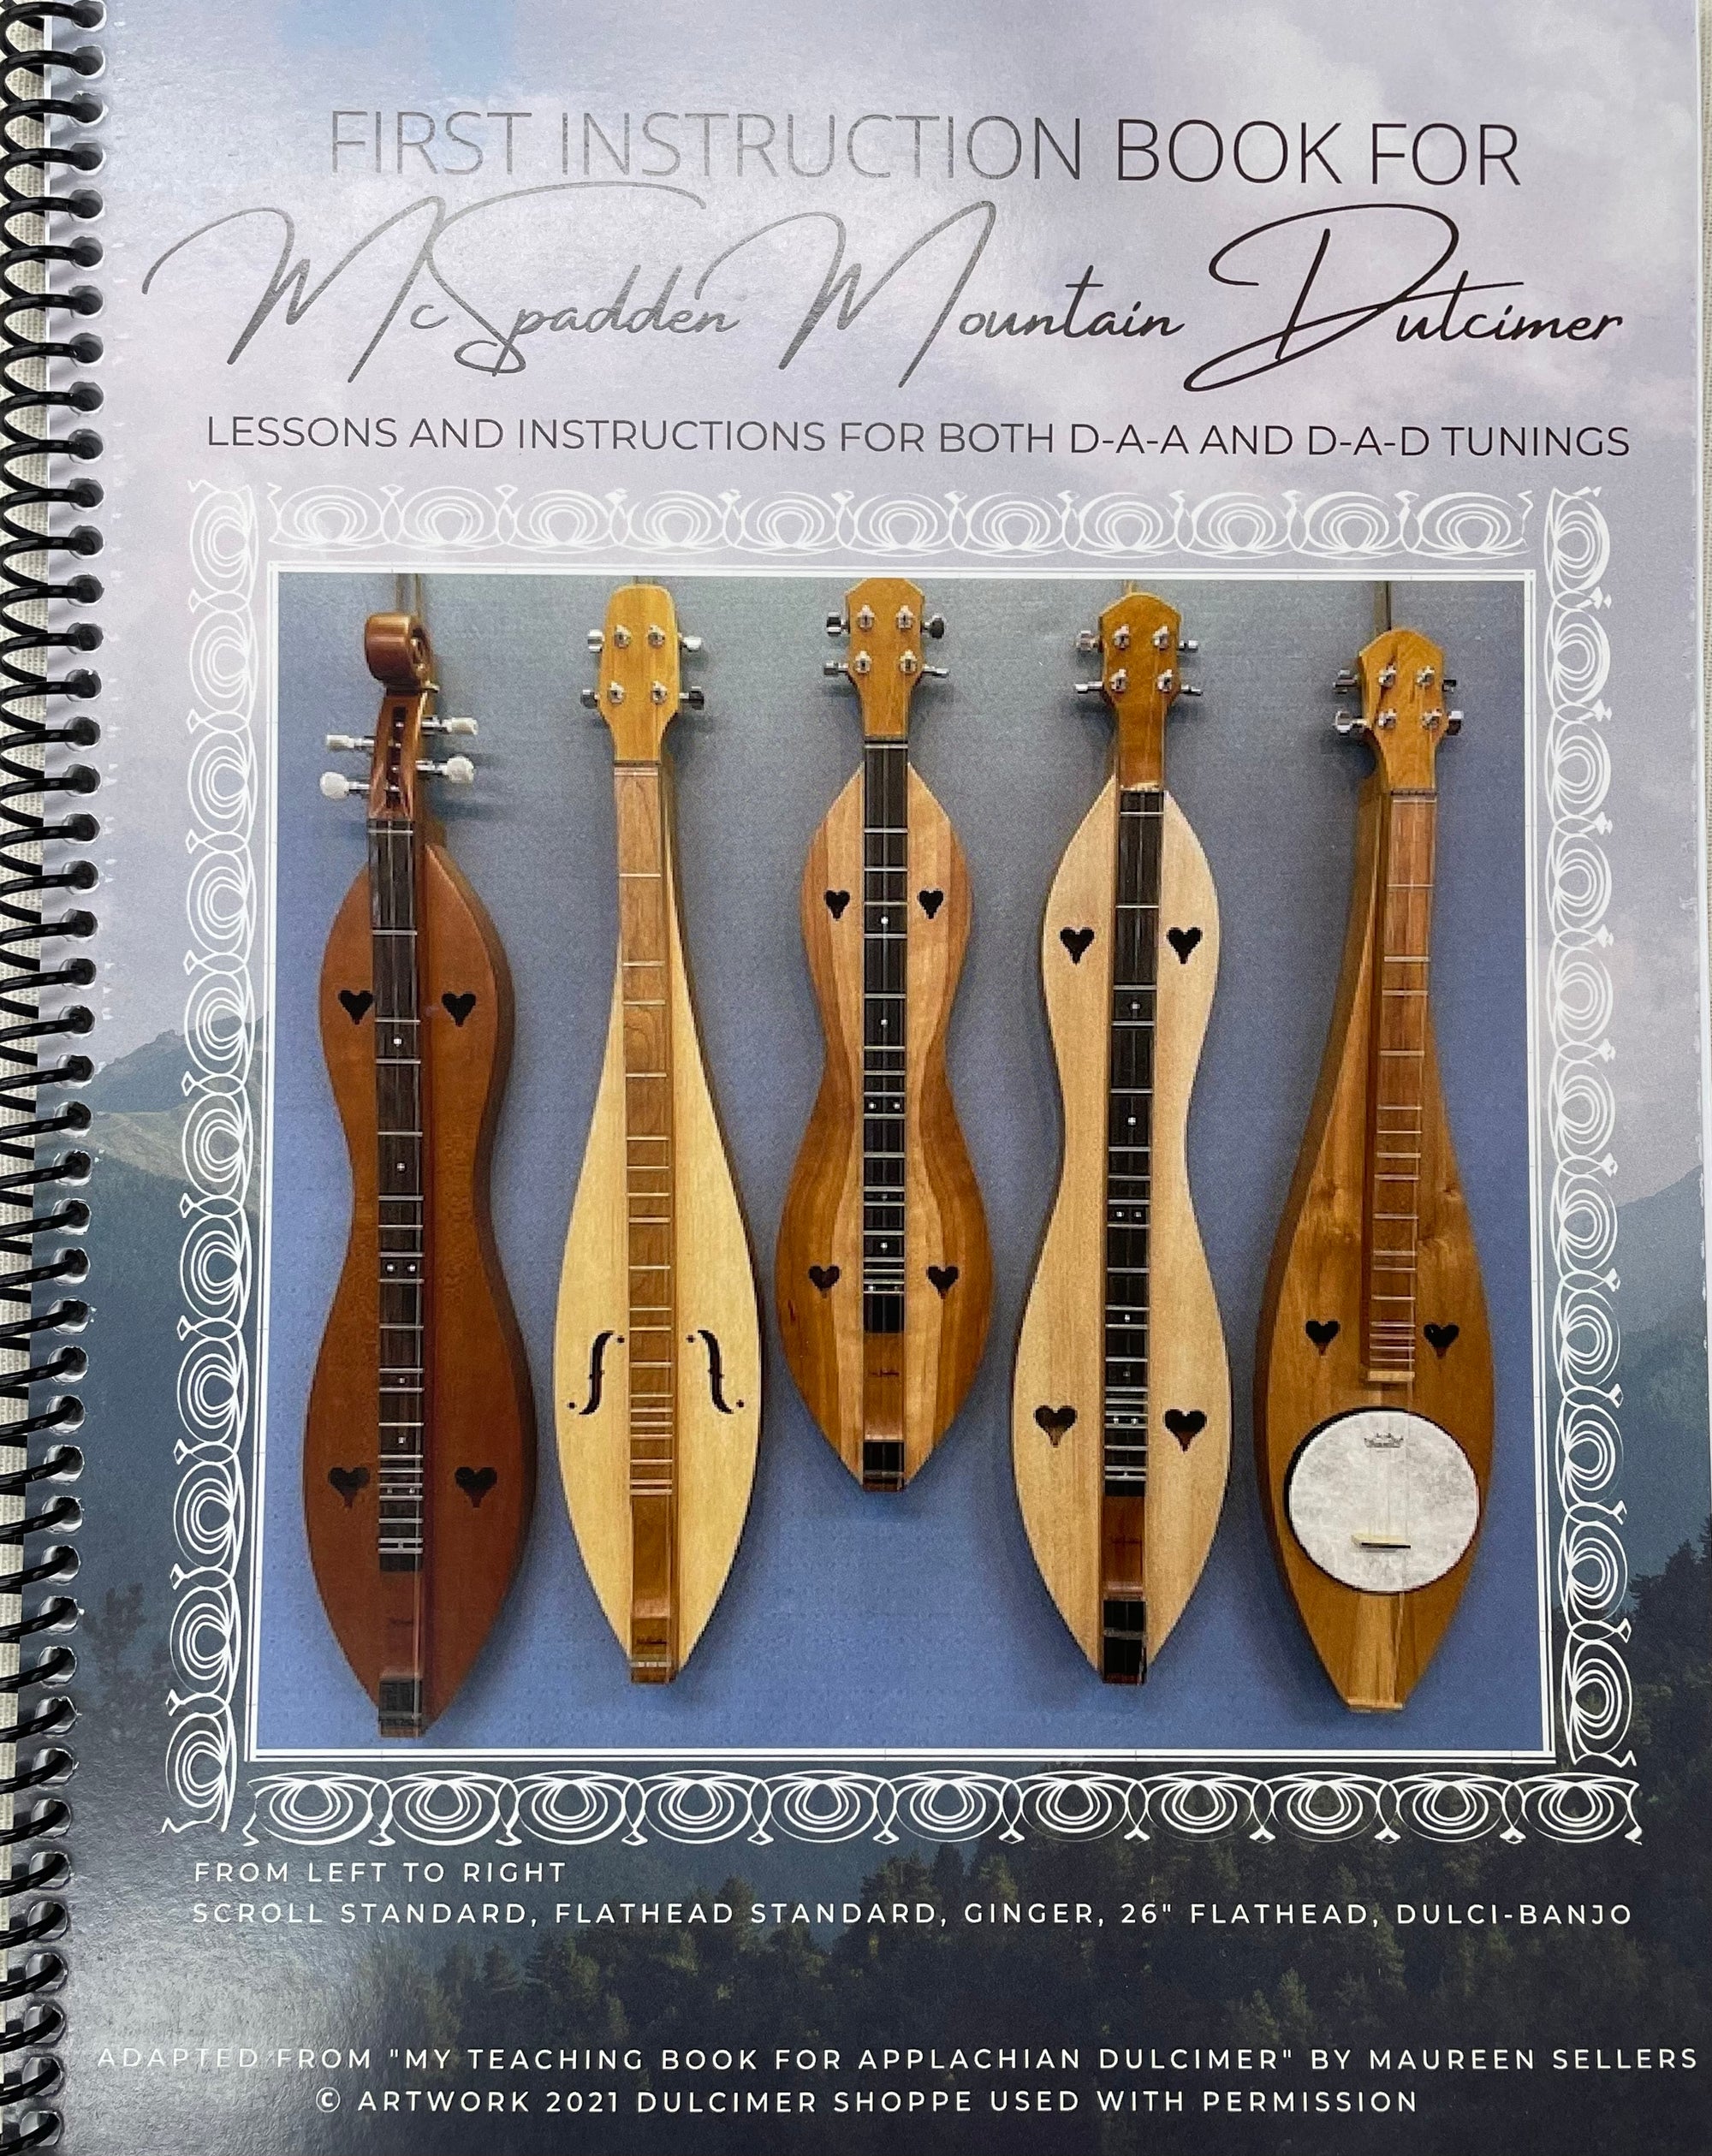 First Instruction Book for McSpadden Mountain Dulcimer for beginners in D-A-A and D-A-D tuning.